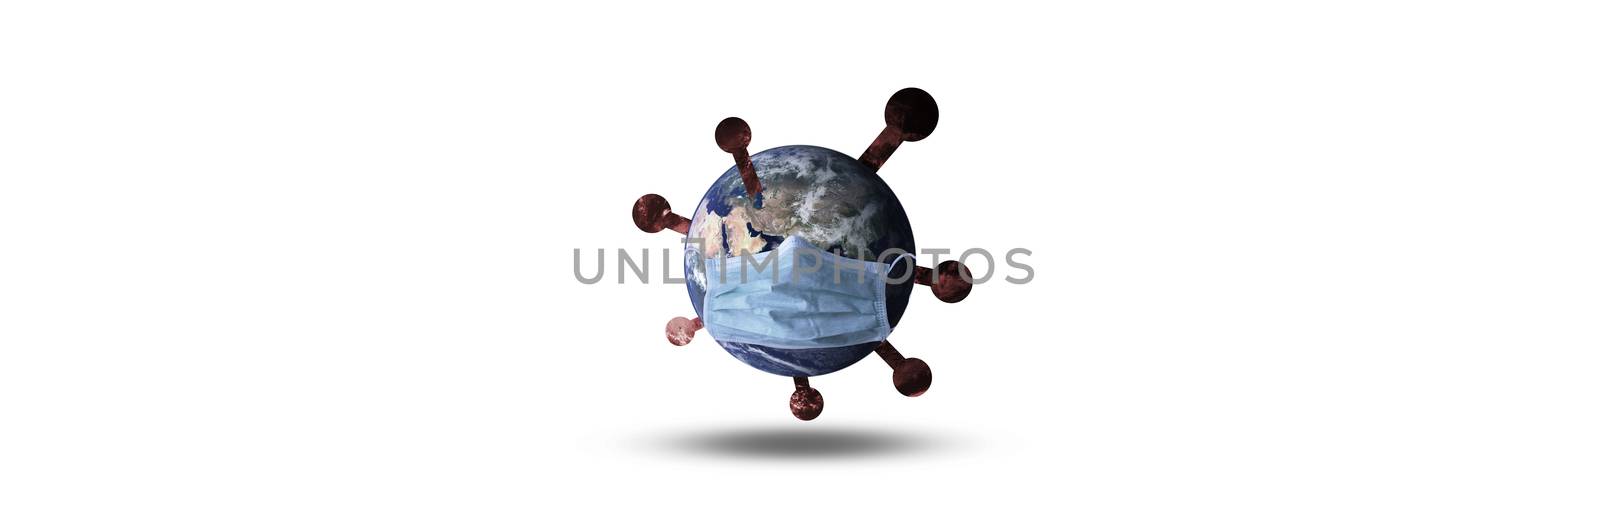 Panoramic World mask protect Corona virus on background with clipping path concept for Earth warning covid19 flu pandemic quarantine, wide environment day care for pneumonitis and symptoms control by golfmhee